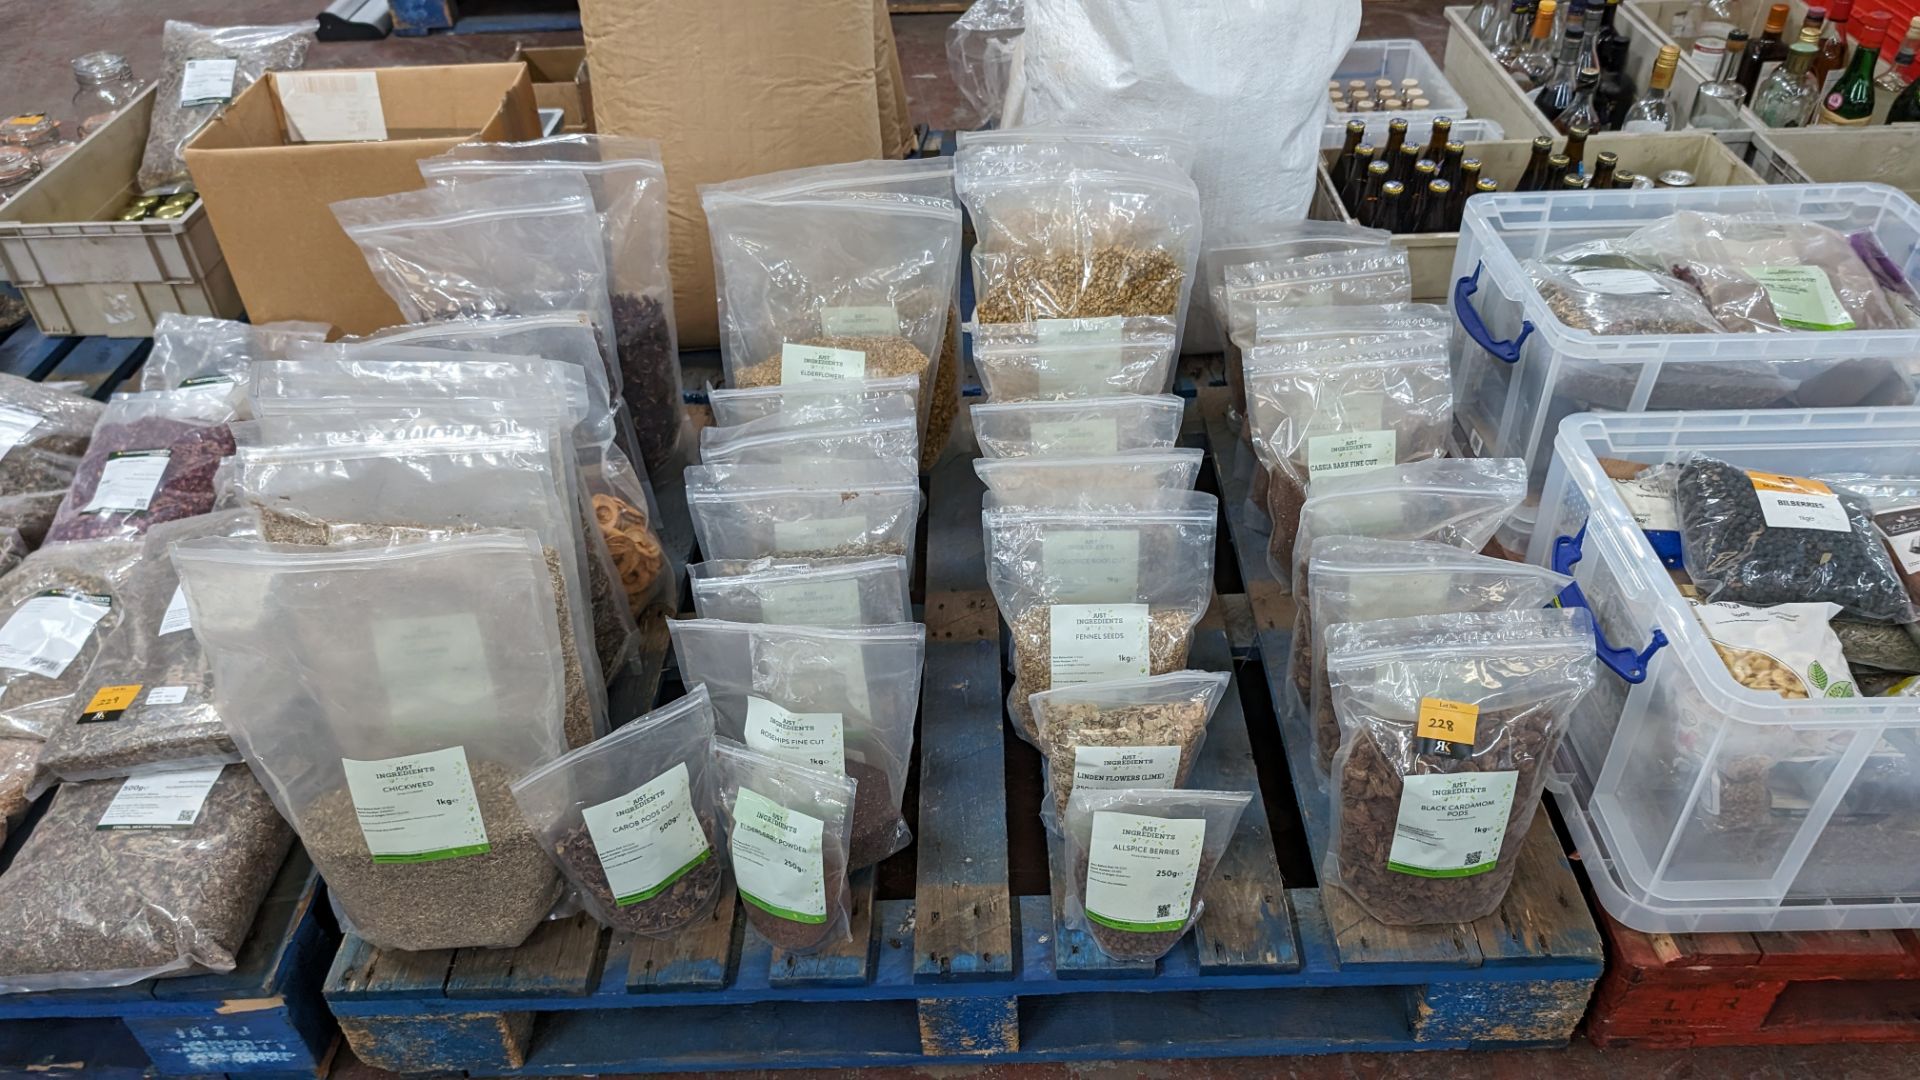 The contents of a pallet of assorted aromats, herbs and spices. NB: Please note many of these item